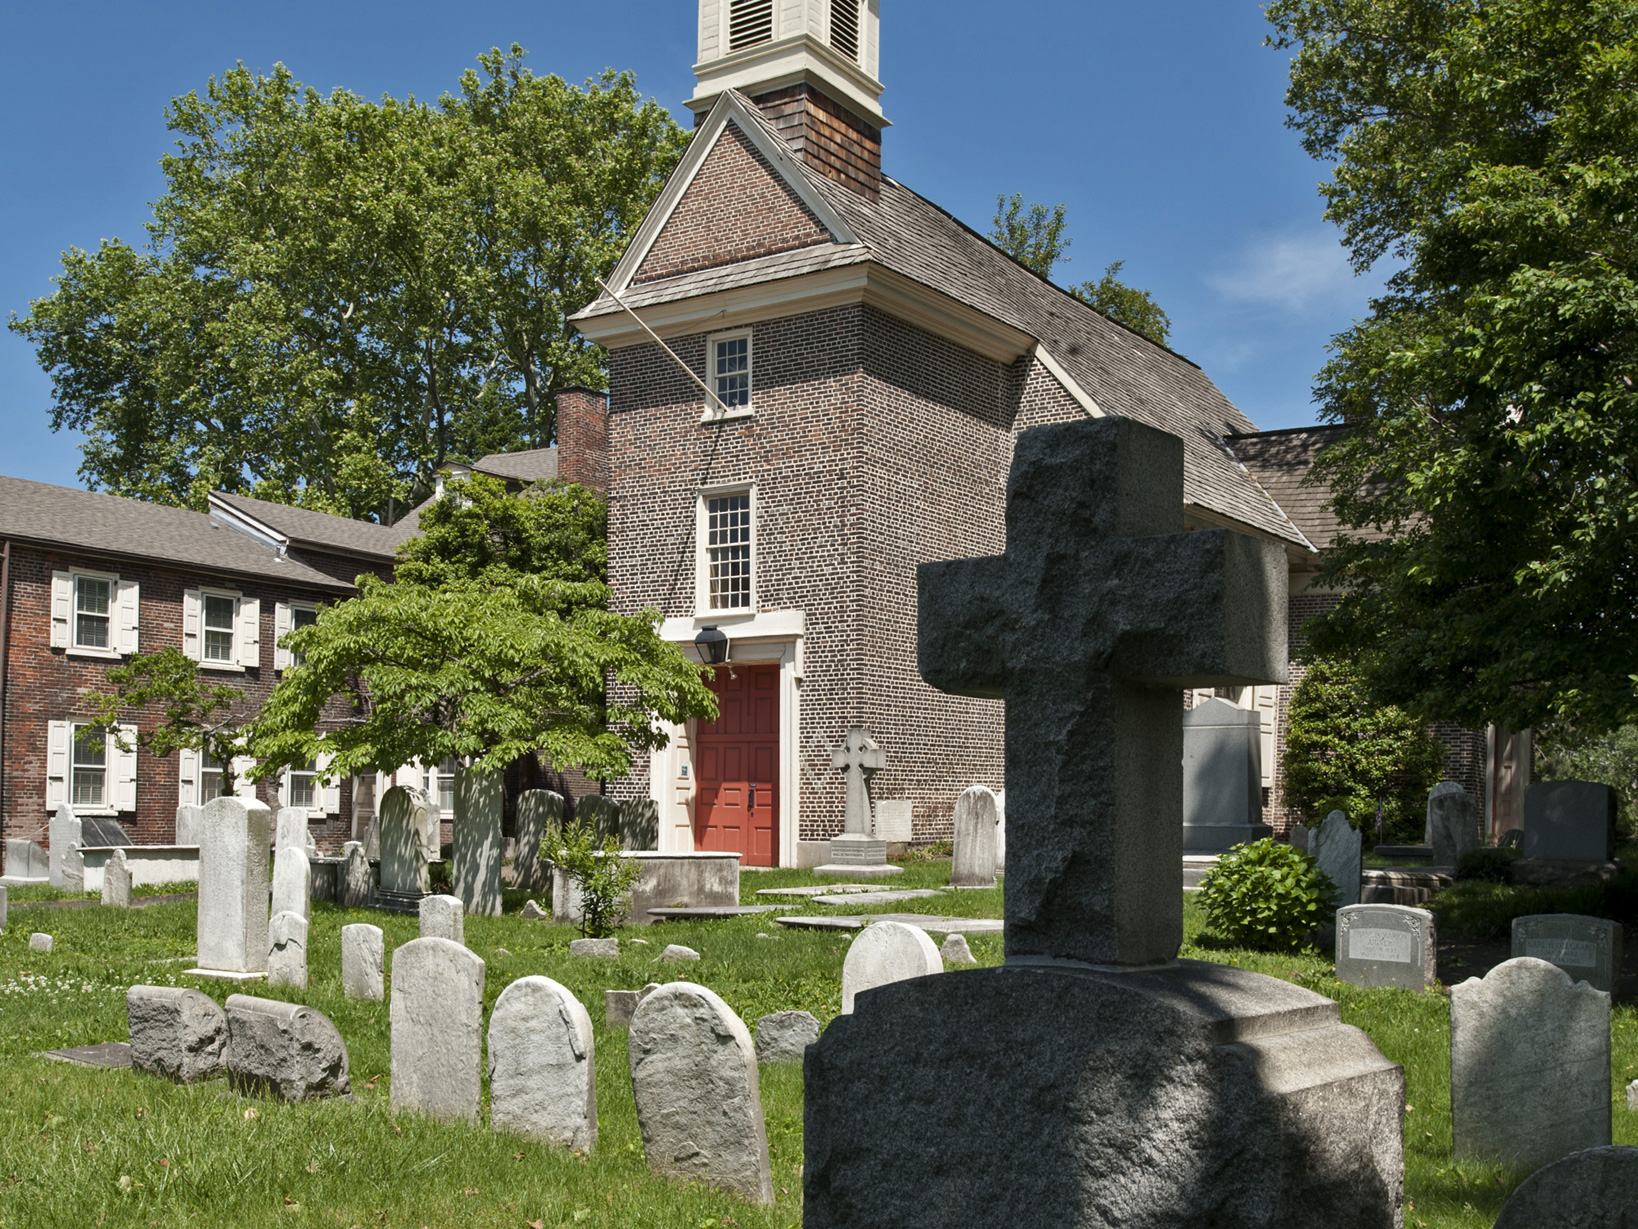 A color photo of the Gloria Dei Church yard showing tombstones with the church in the background.